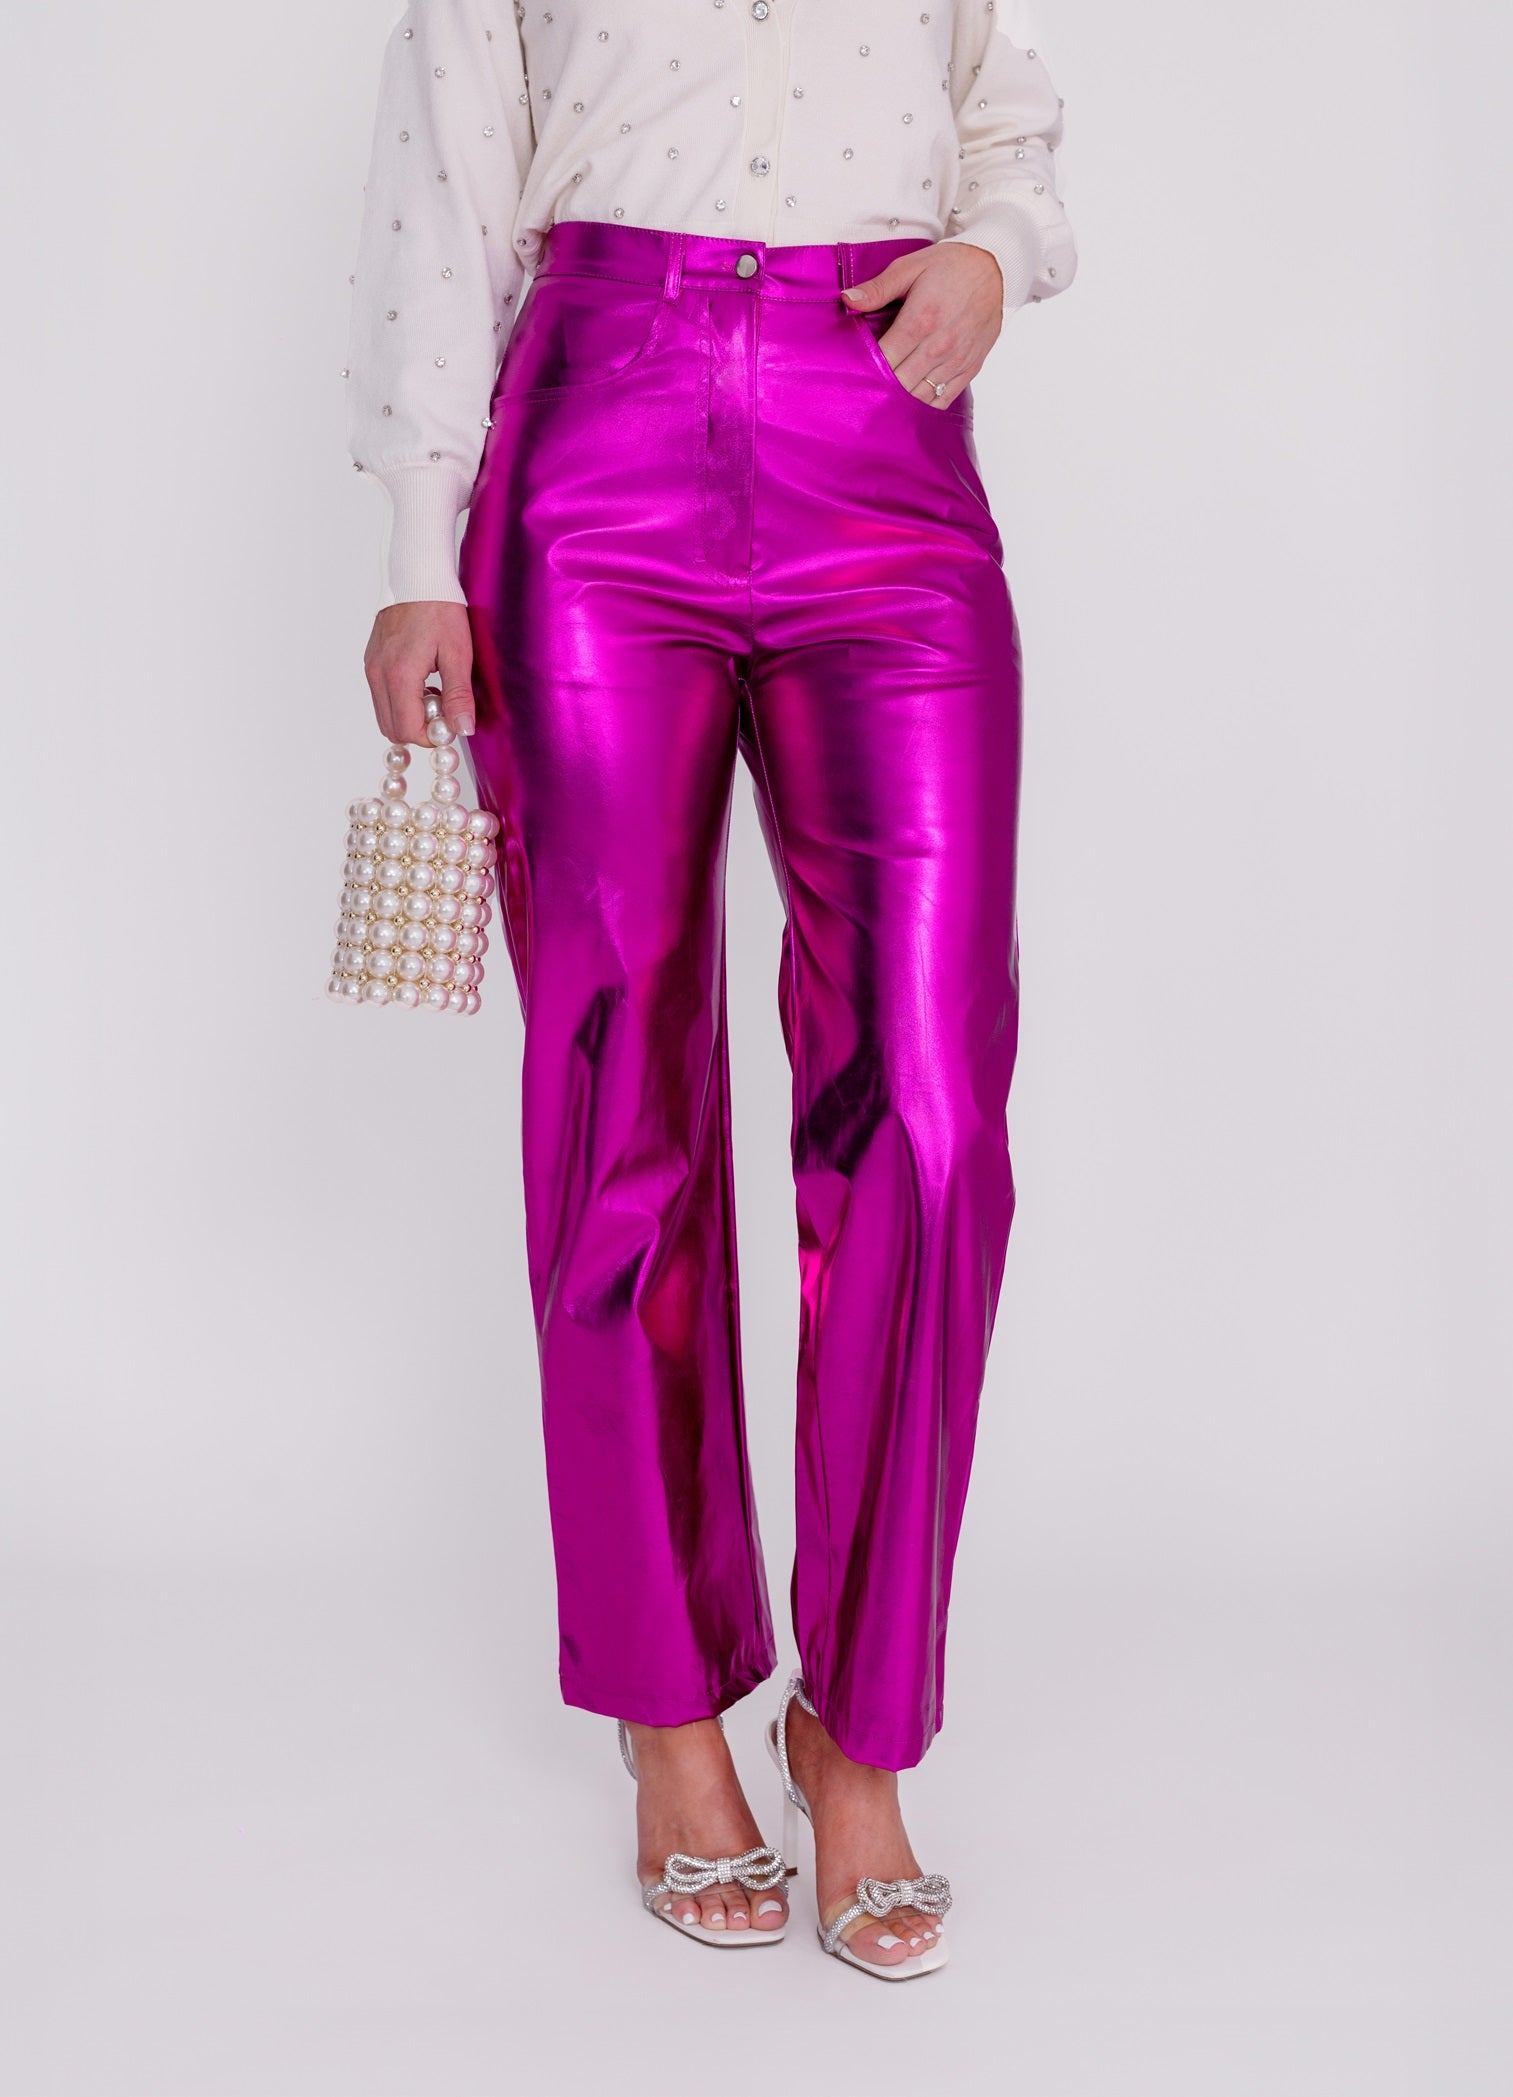 Zara High Waisted Metallic Pants in Pink and Silver – Amazing Mae